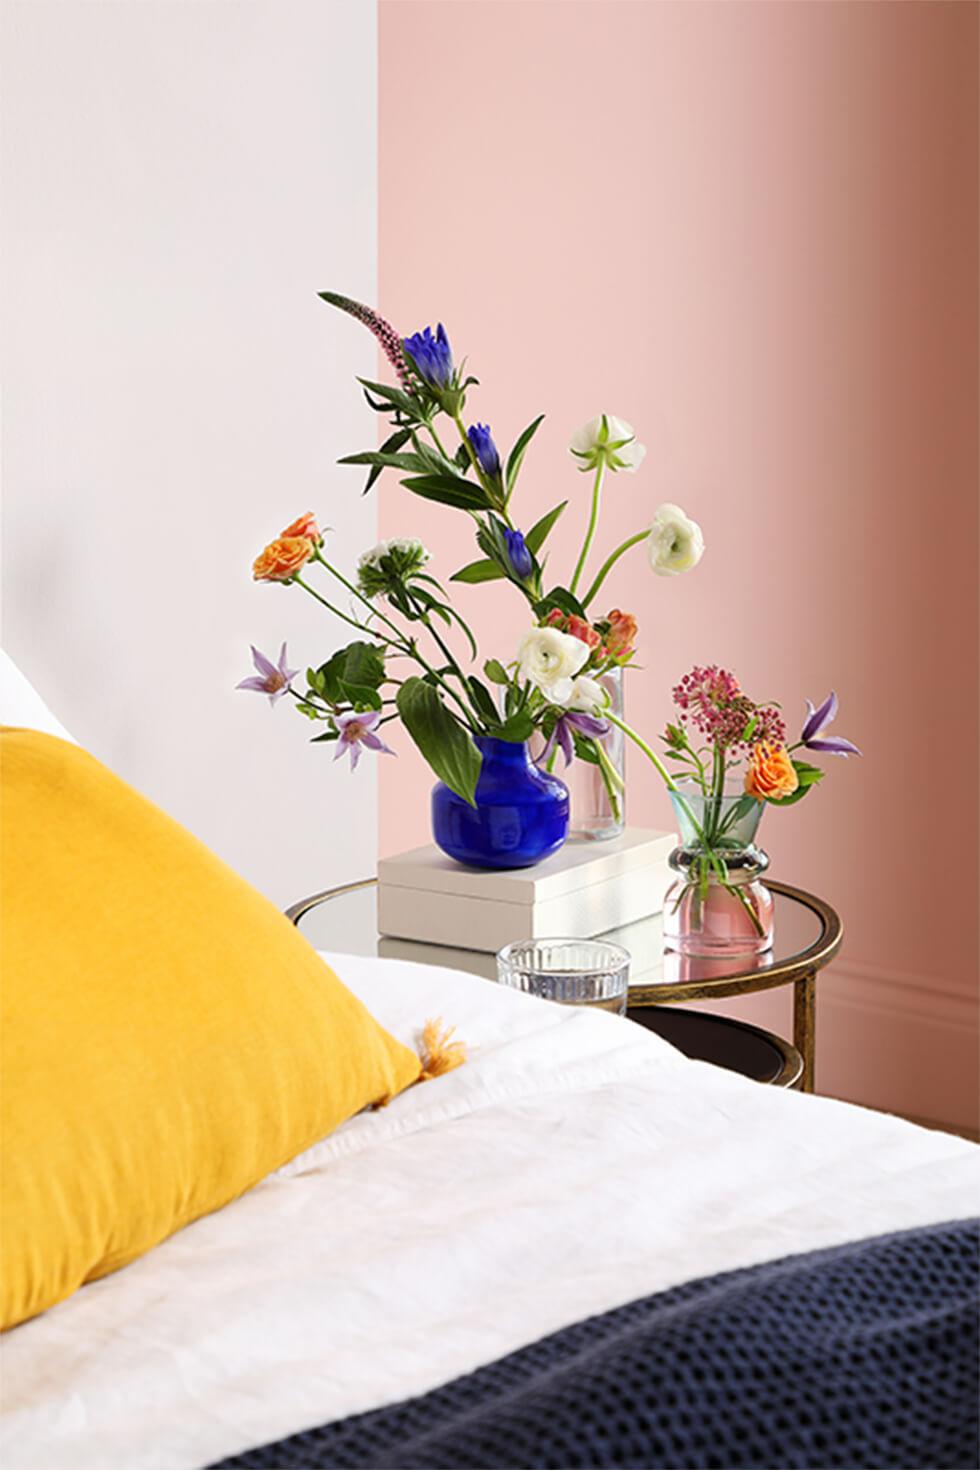 Spring floral arrangement in a blue vase by a bedside, in a pastel pink and yellow bedroom